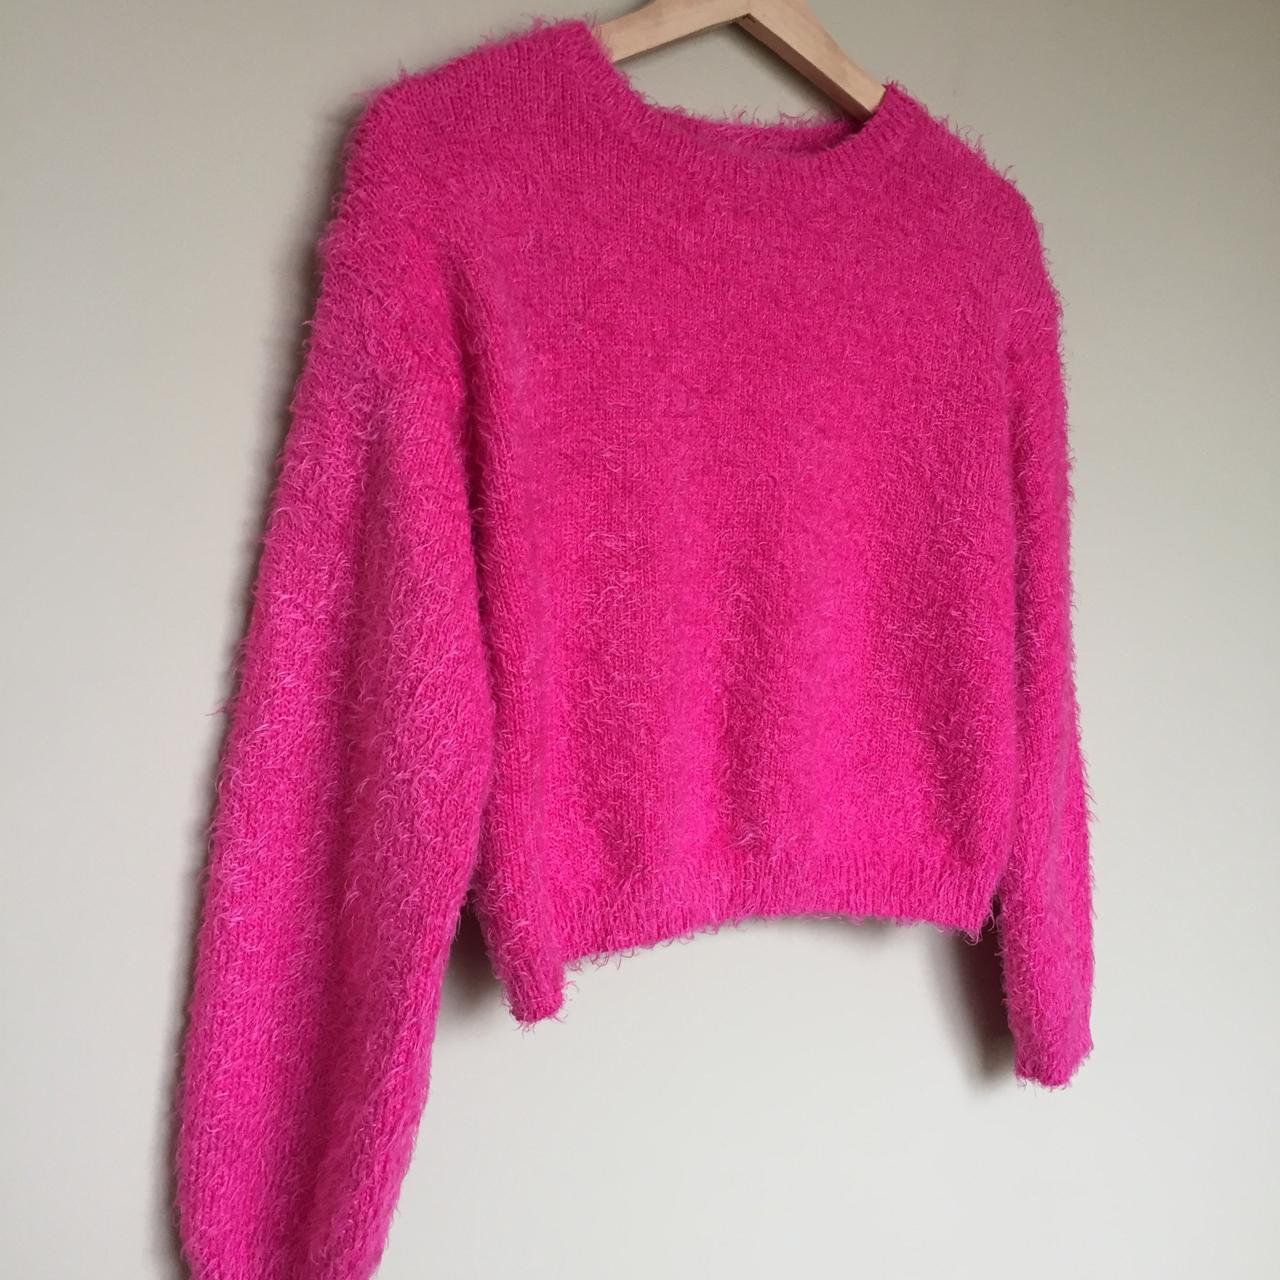 Forever 21 Pink Fuzzy Crop Top Sweater Cropped... - Depop